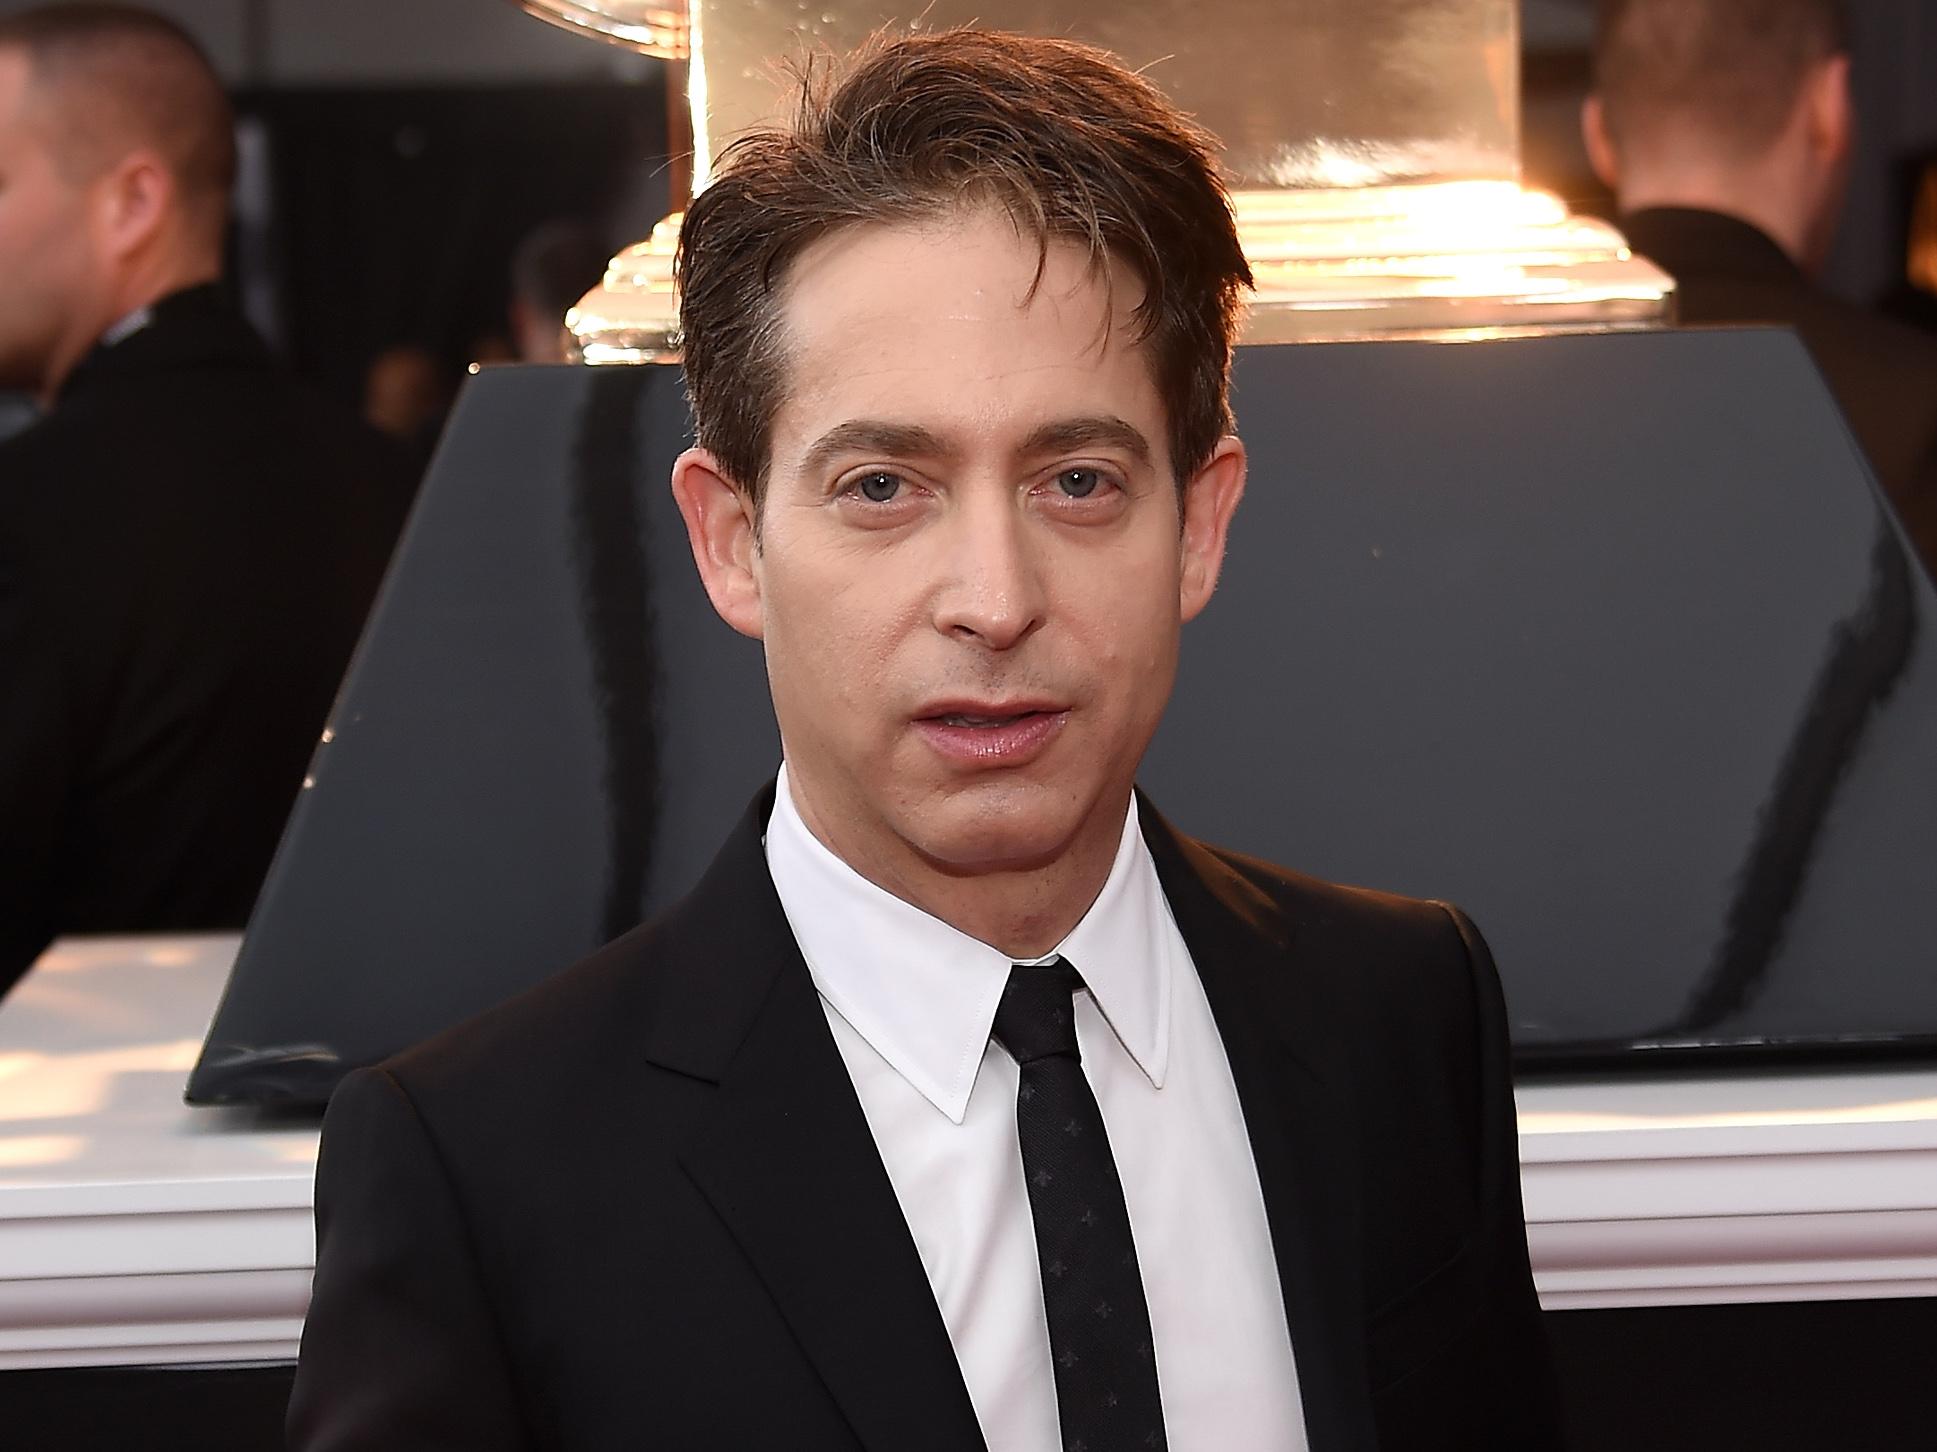 Charlie Walk has denied allegations of sexual misconduct said to have taken place over at least two decades